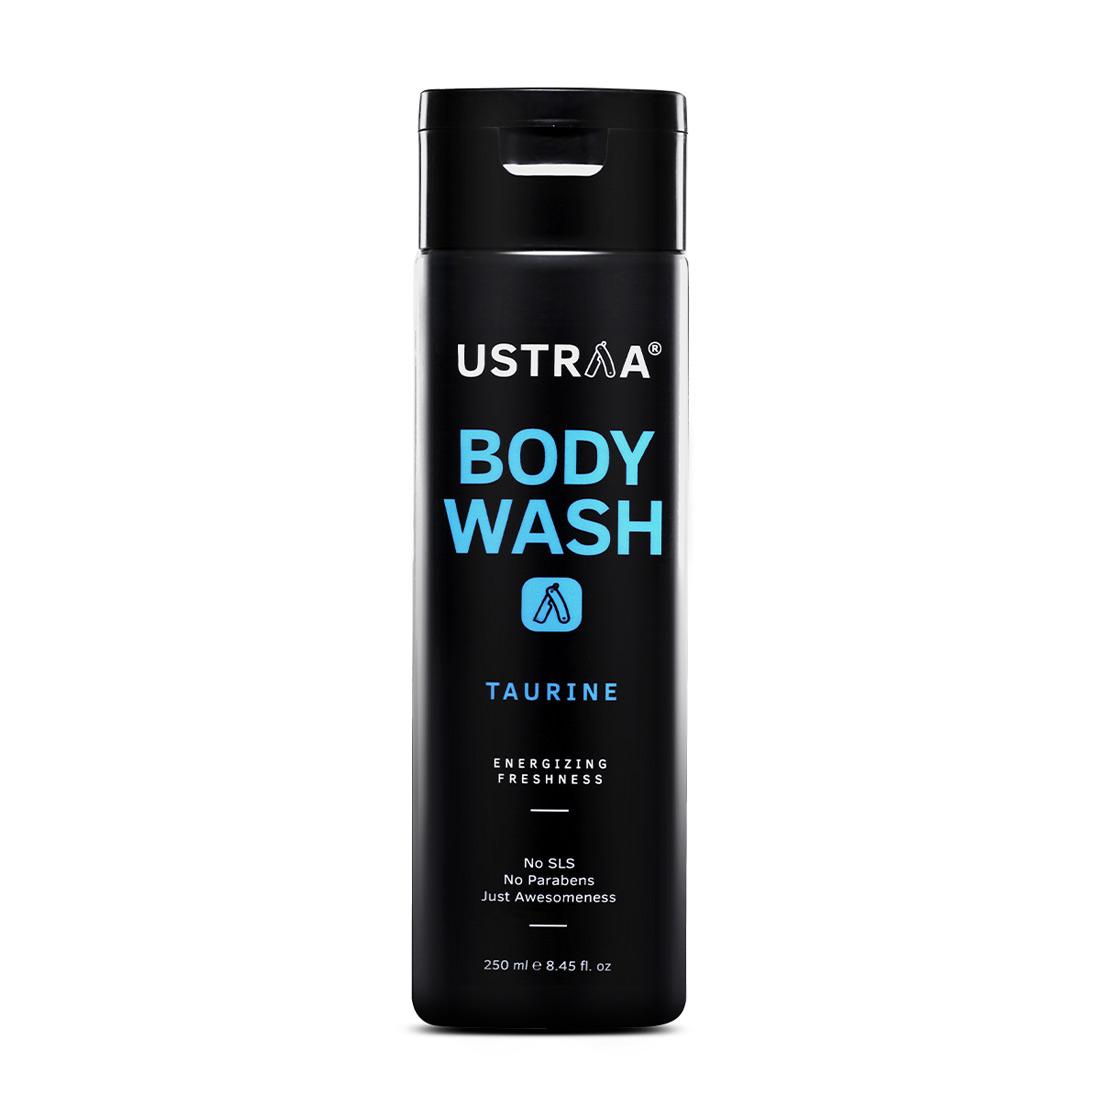 Ustraa Body Wash for Men 200 ml - With Taurine for Energizing showers and Skin Damage Repair